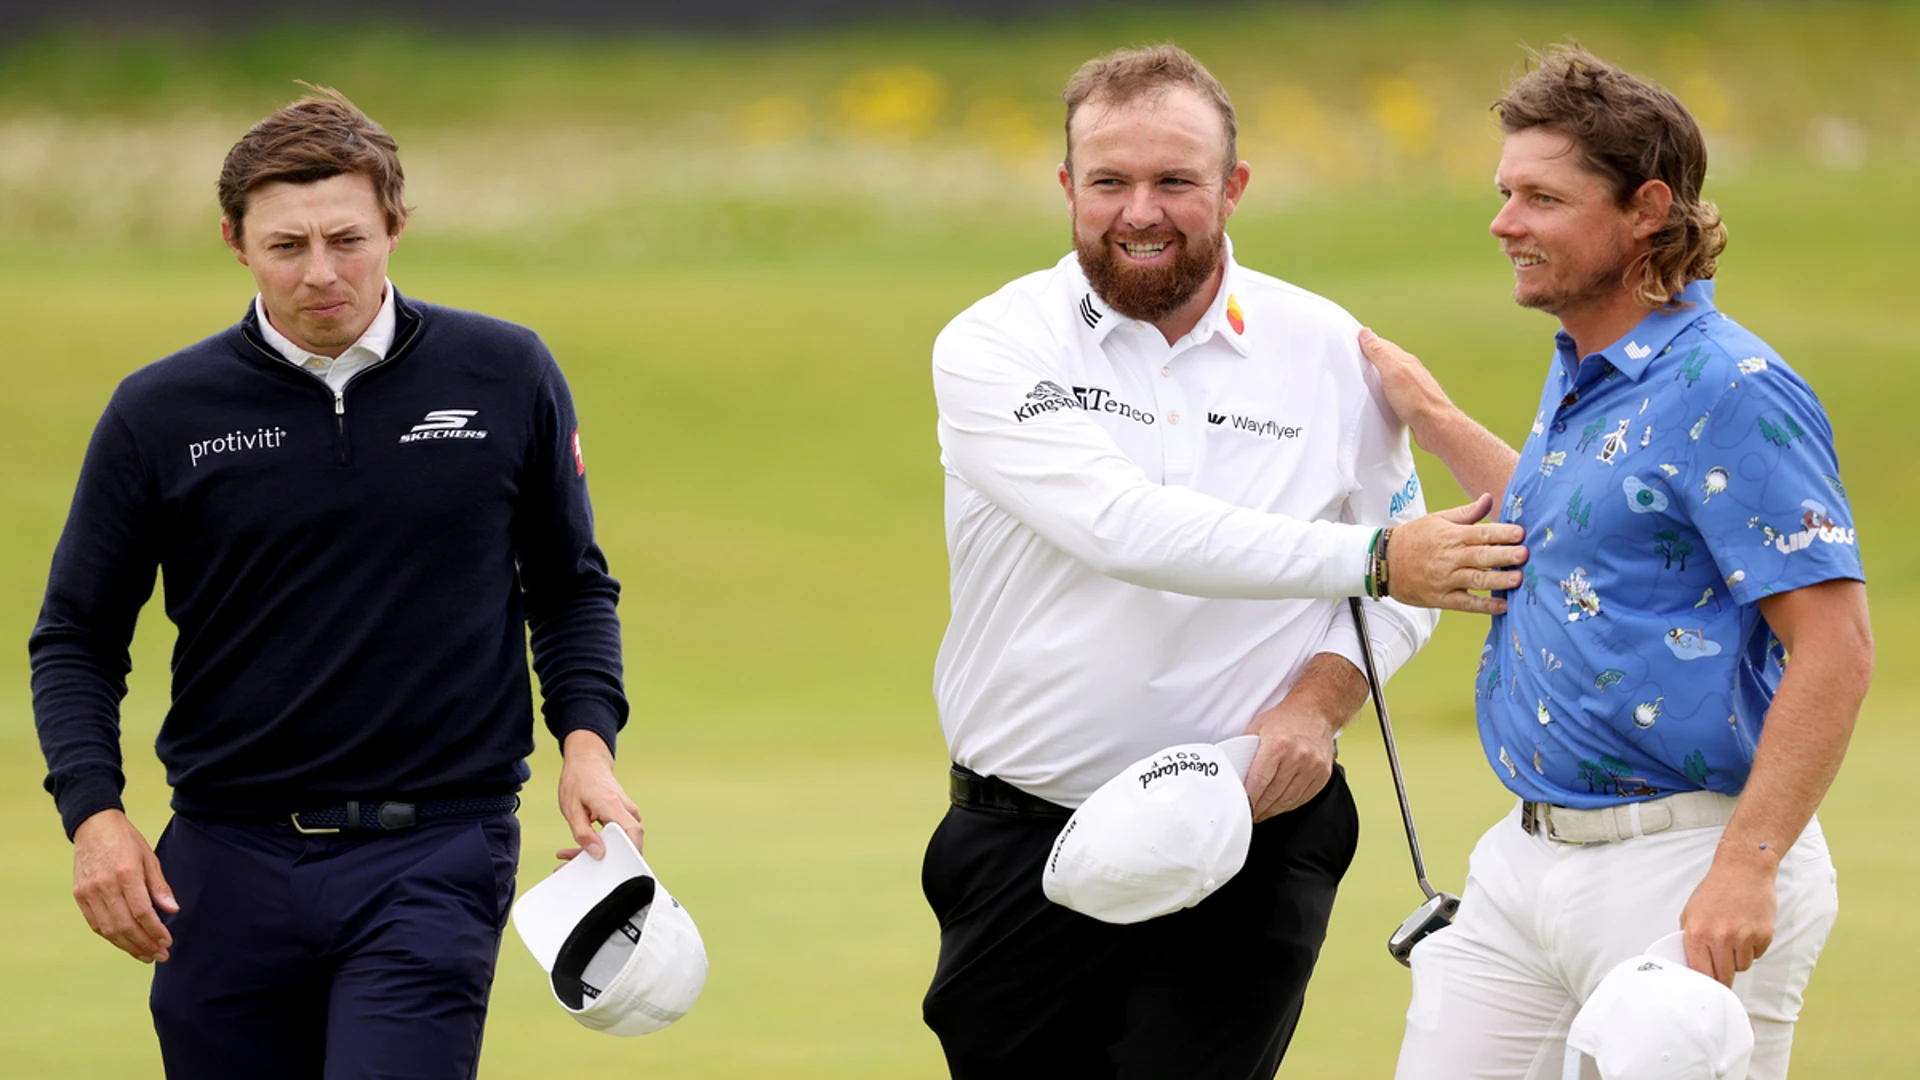 Lowry surges into lead at The Open